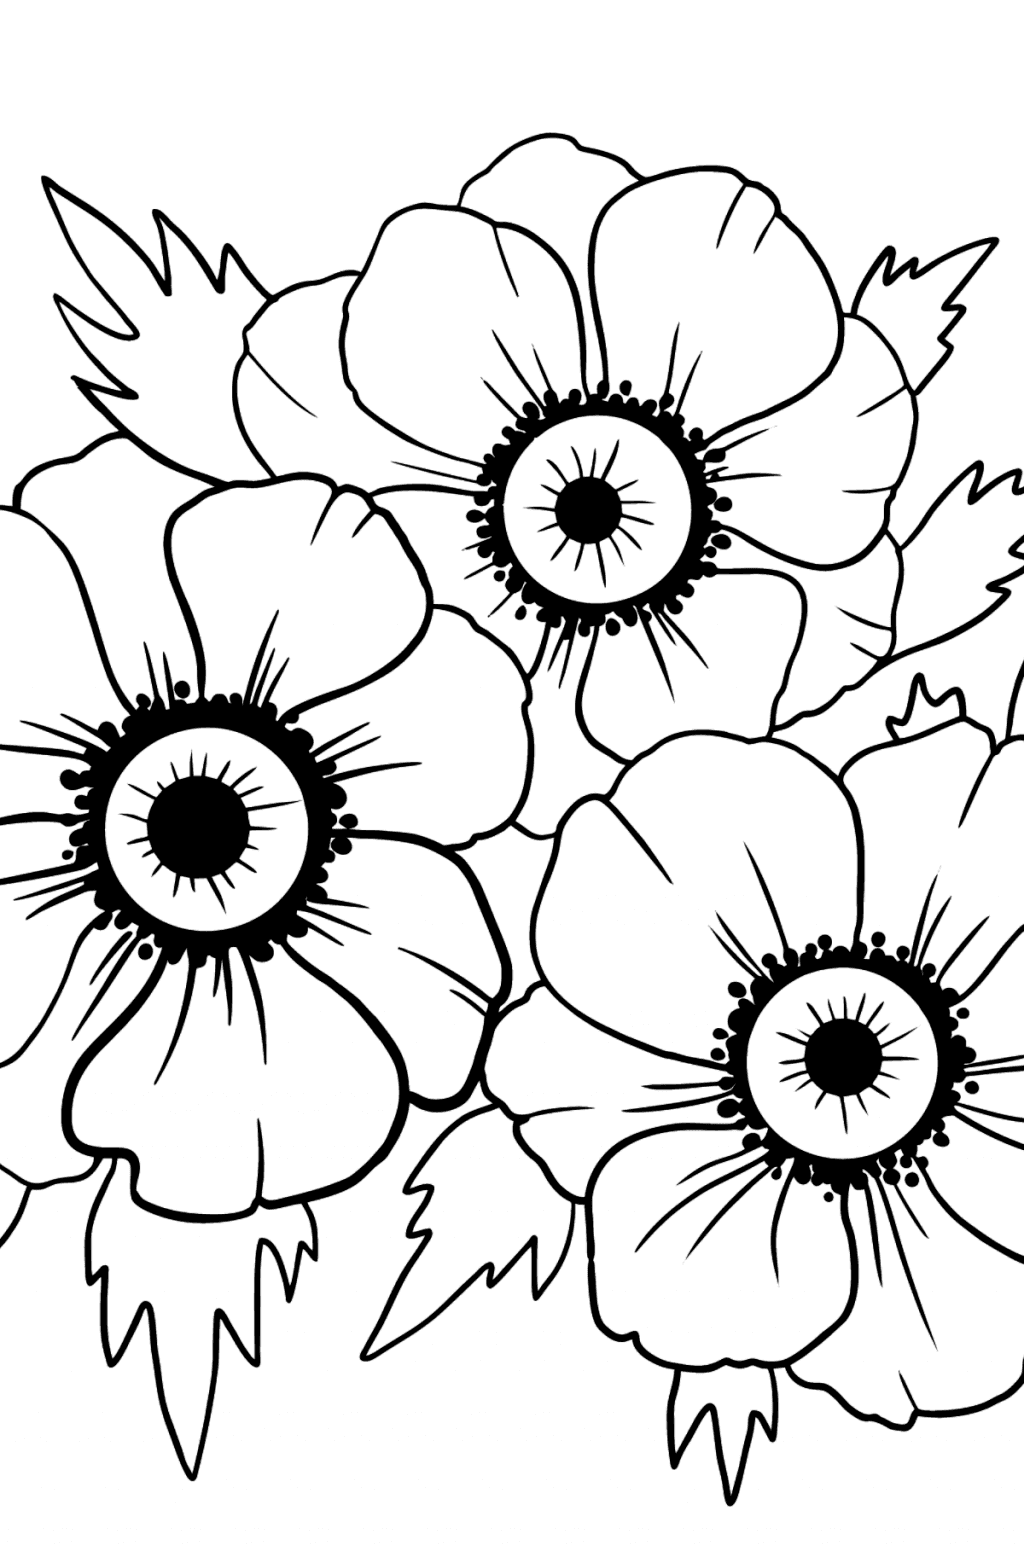 Coloring Page Anemone Mr. Fokker ♥ Online and Print for Free!